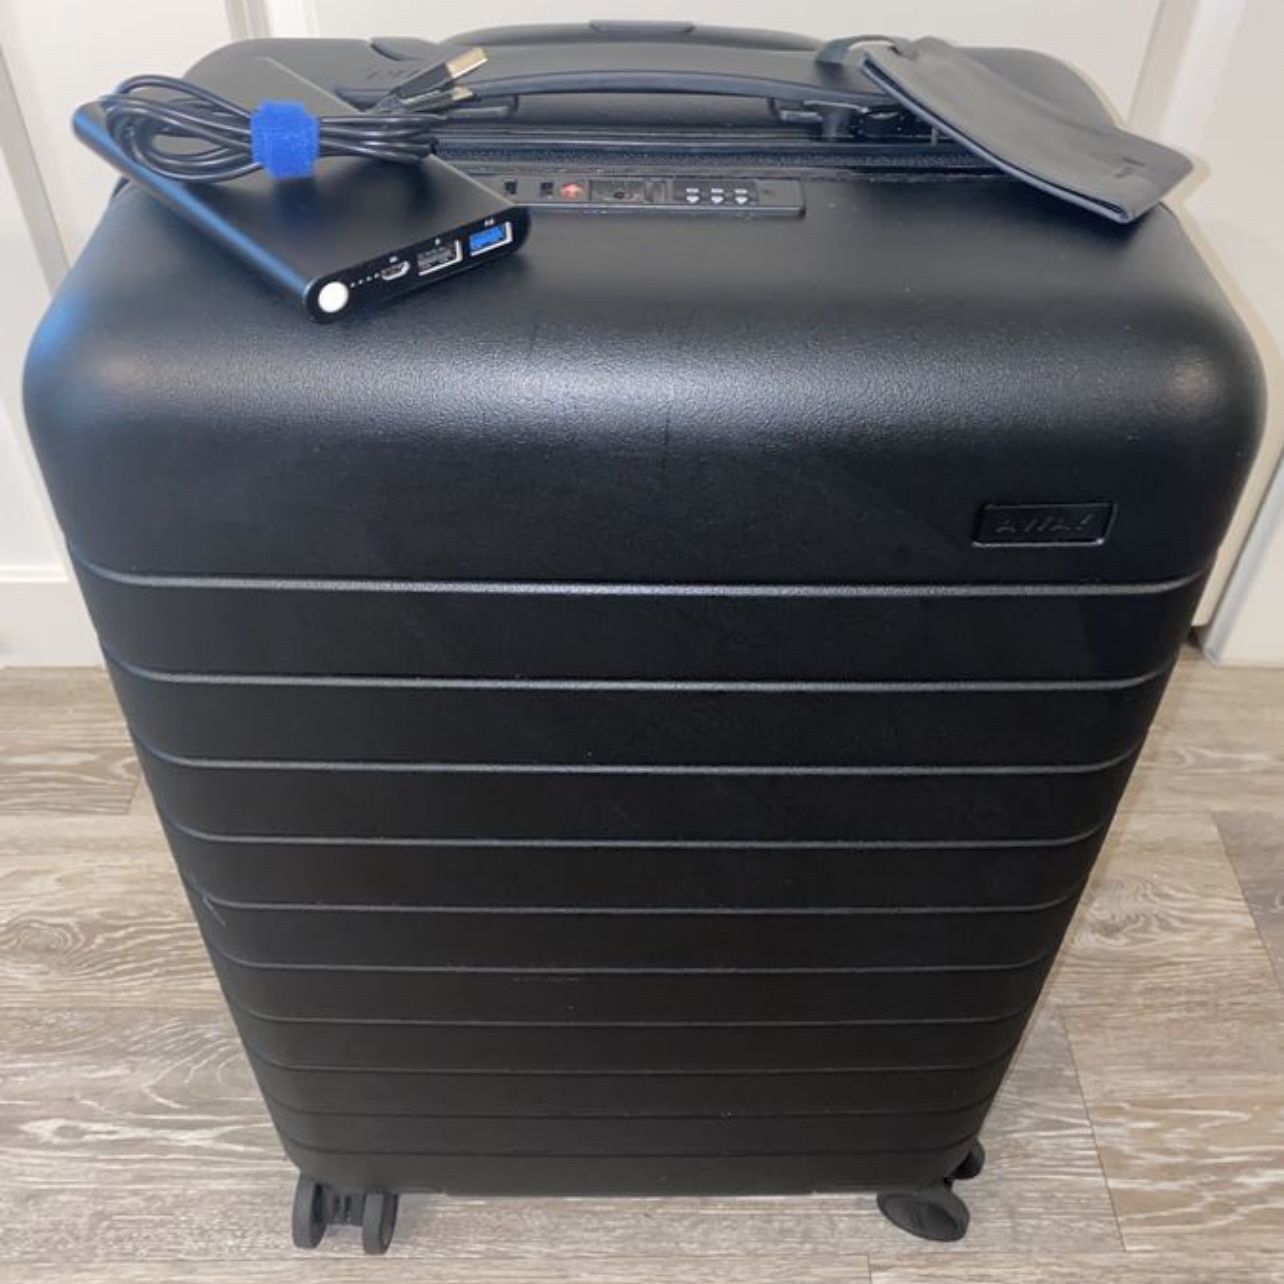 Away Luggage For Sale for Sale in Los Angeles, CA - OfferUp